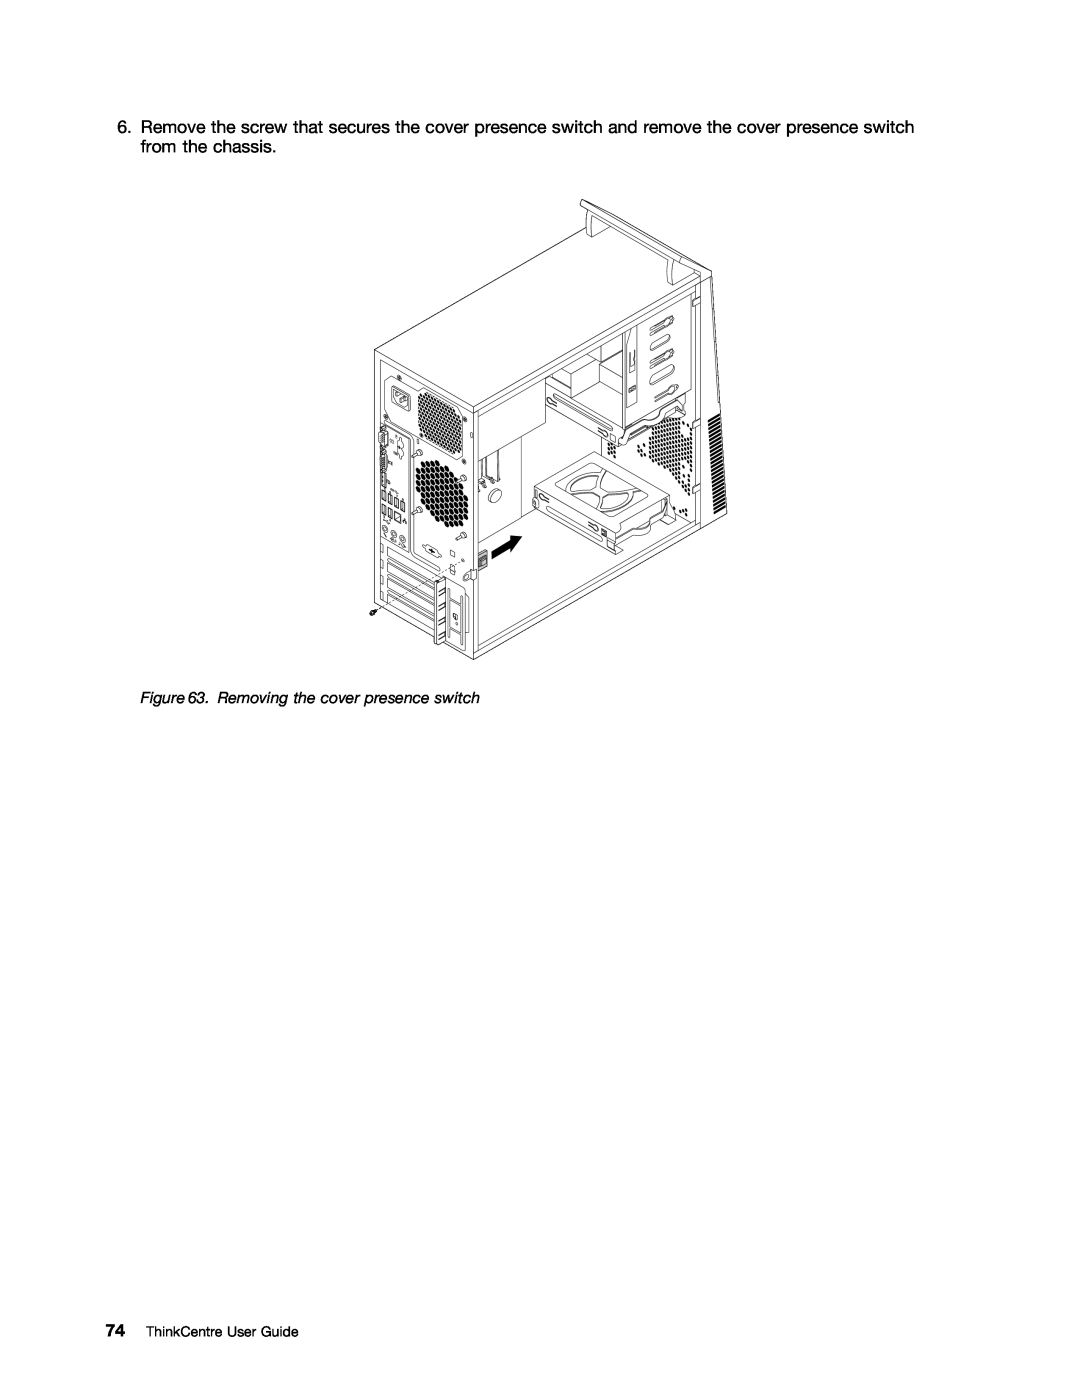 Lenovo 2756D7U, 2697 manual Removing the cover presence switch, ThinkCentre User Guide 